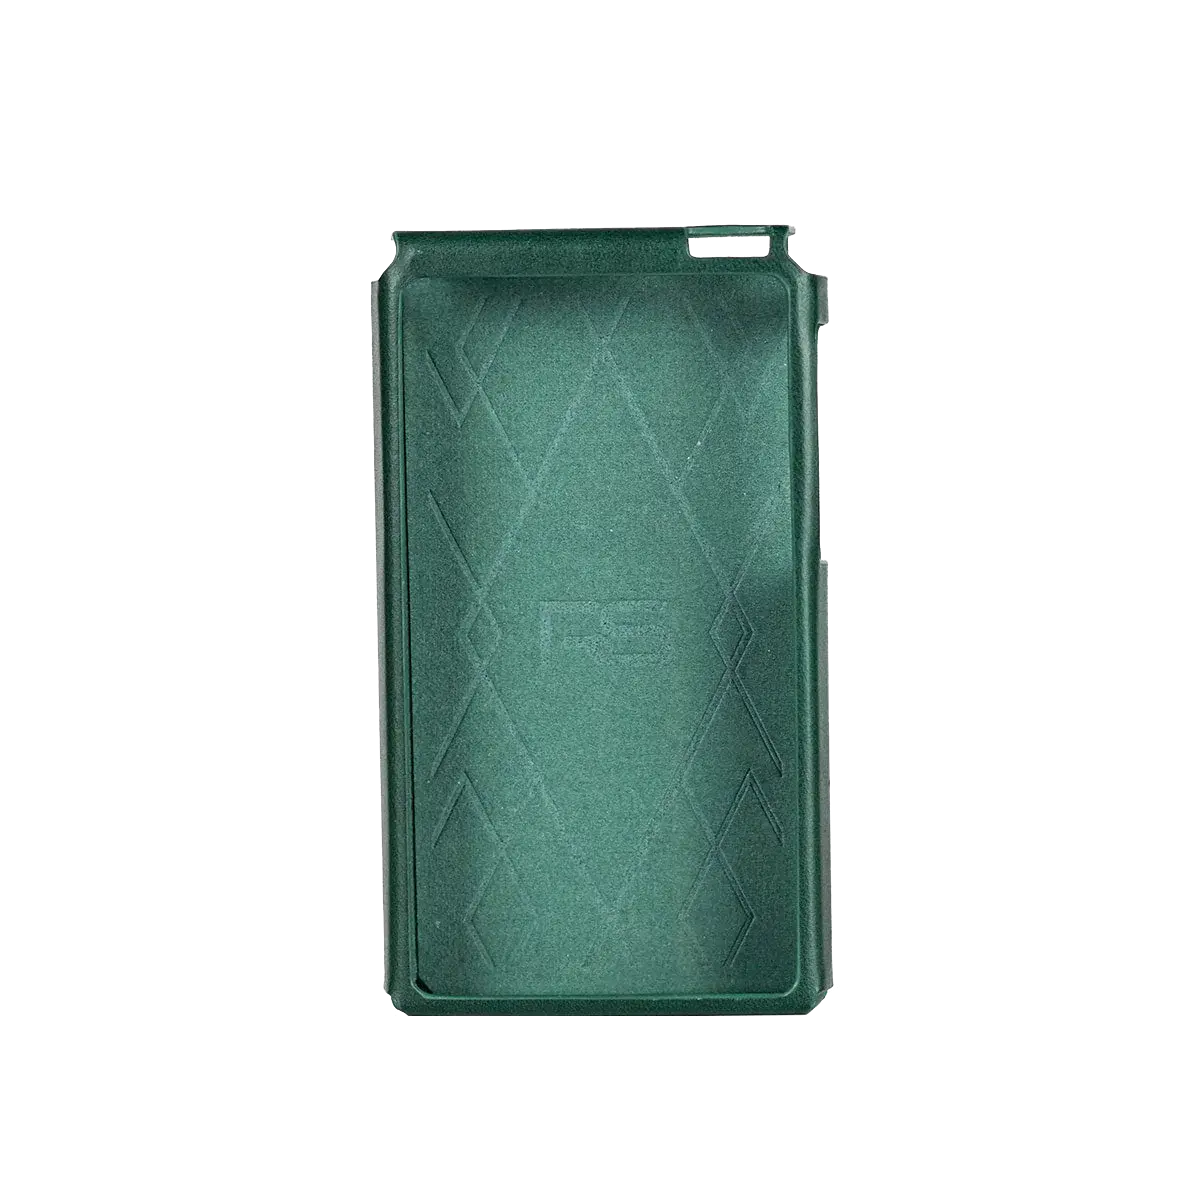 RS6 green leather case